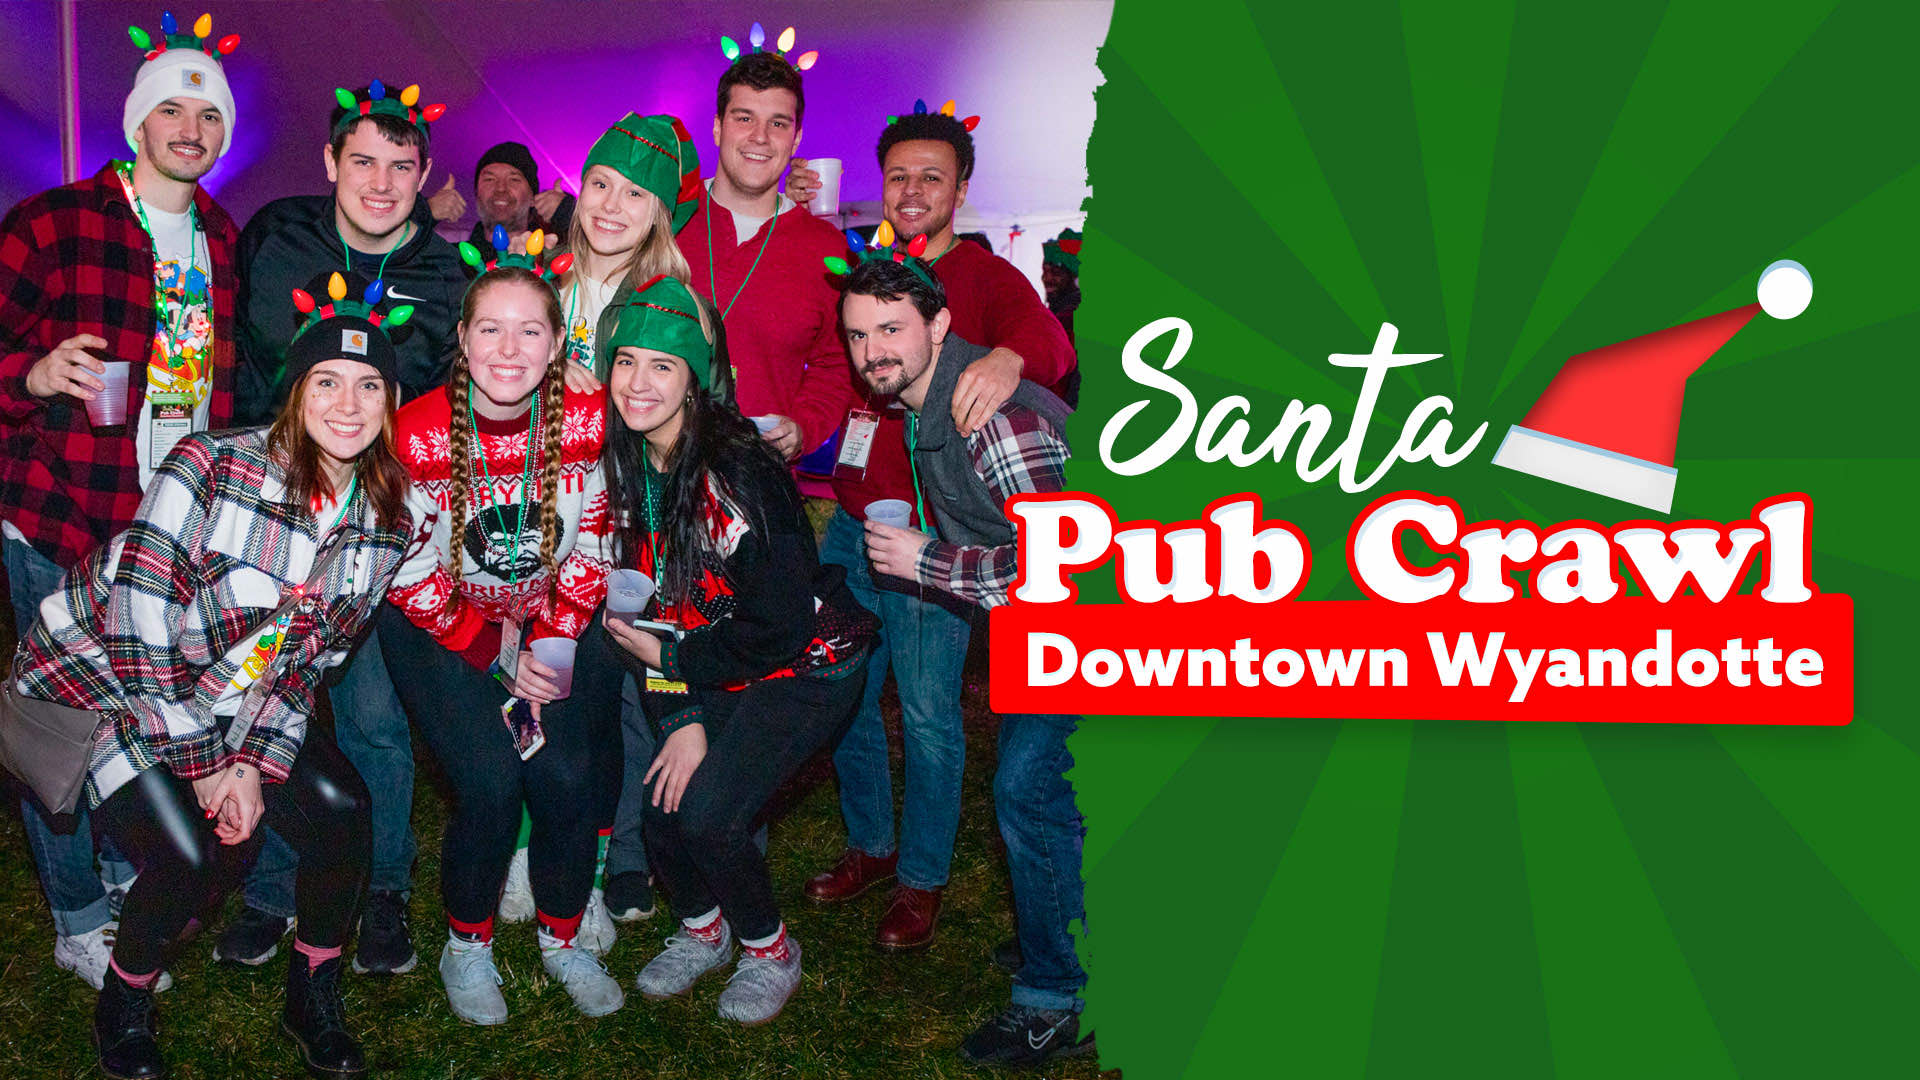 Santa Pub Crawl in Downtown Wyandotte; featuring image of group of friends with christmas light headbands and drinks smiling at camera